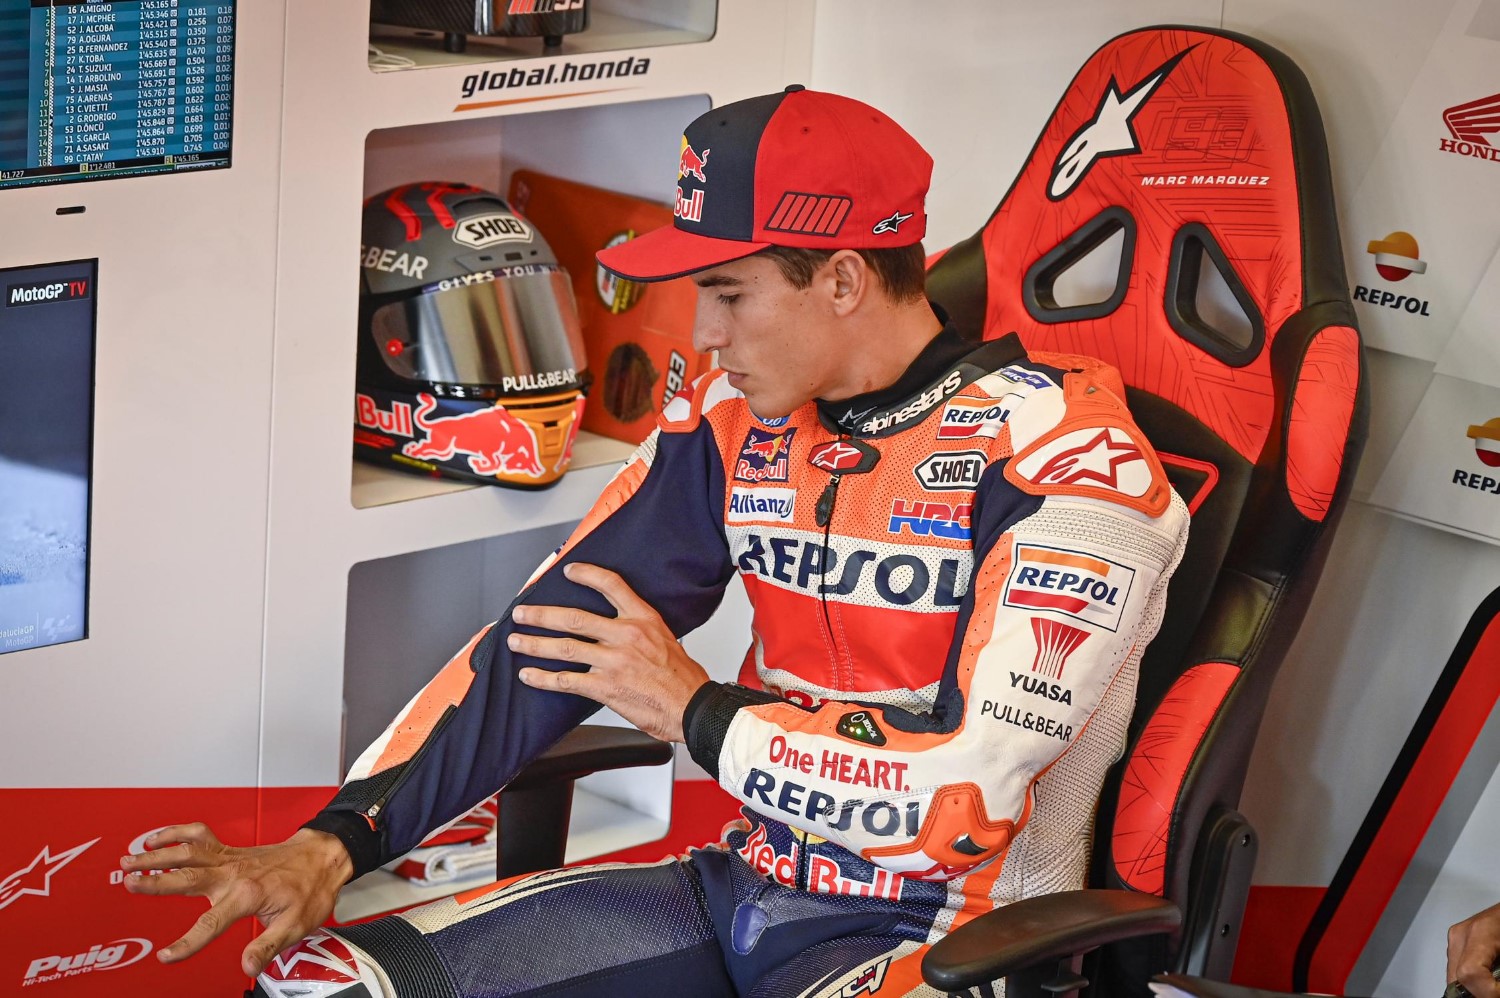 Marquez out for 3 more races?